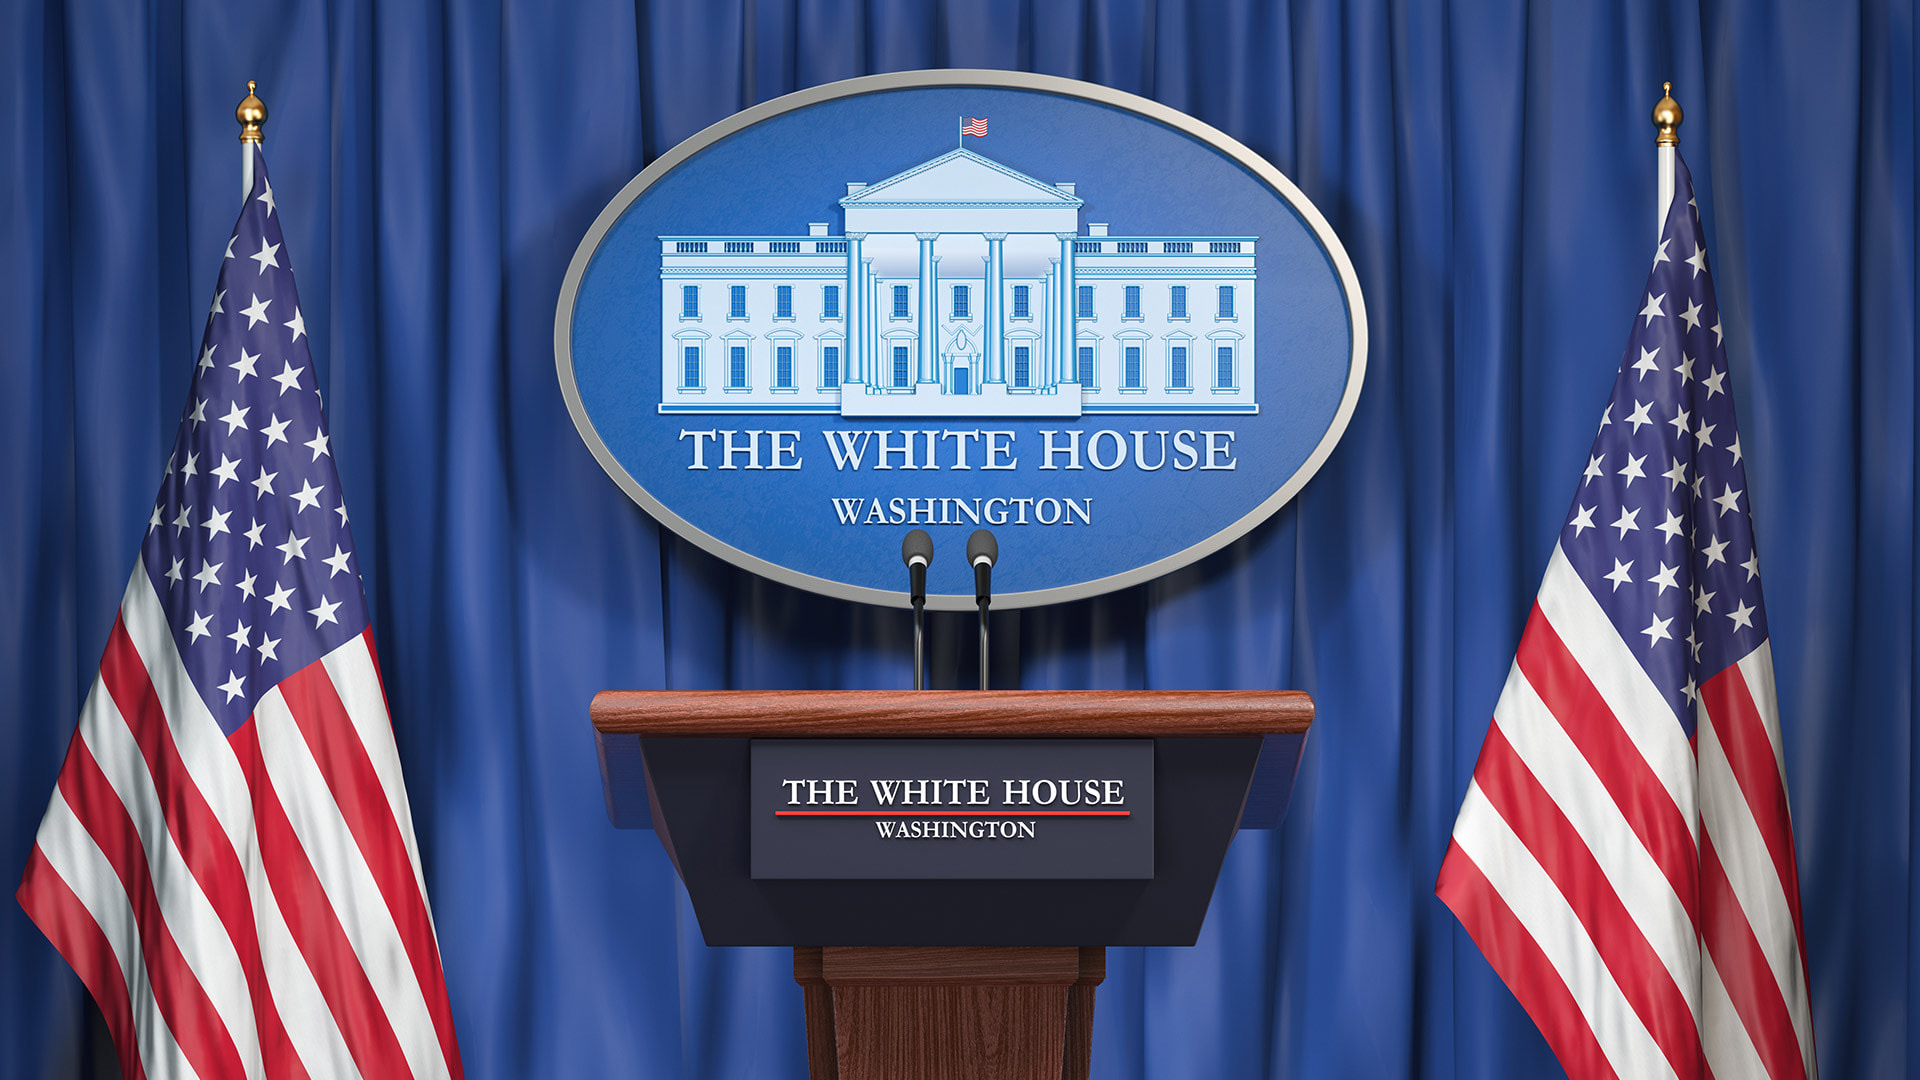 7 Oval Office Background For Teams Image Hd The Zoom Background